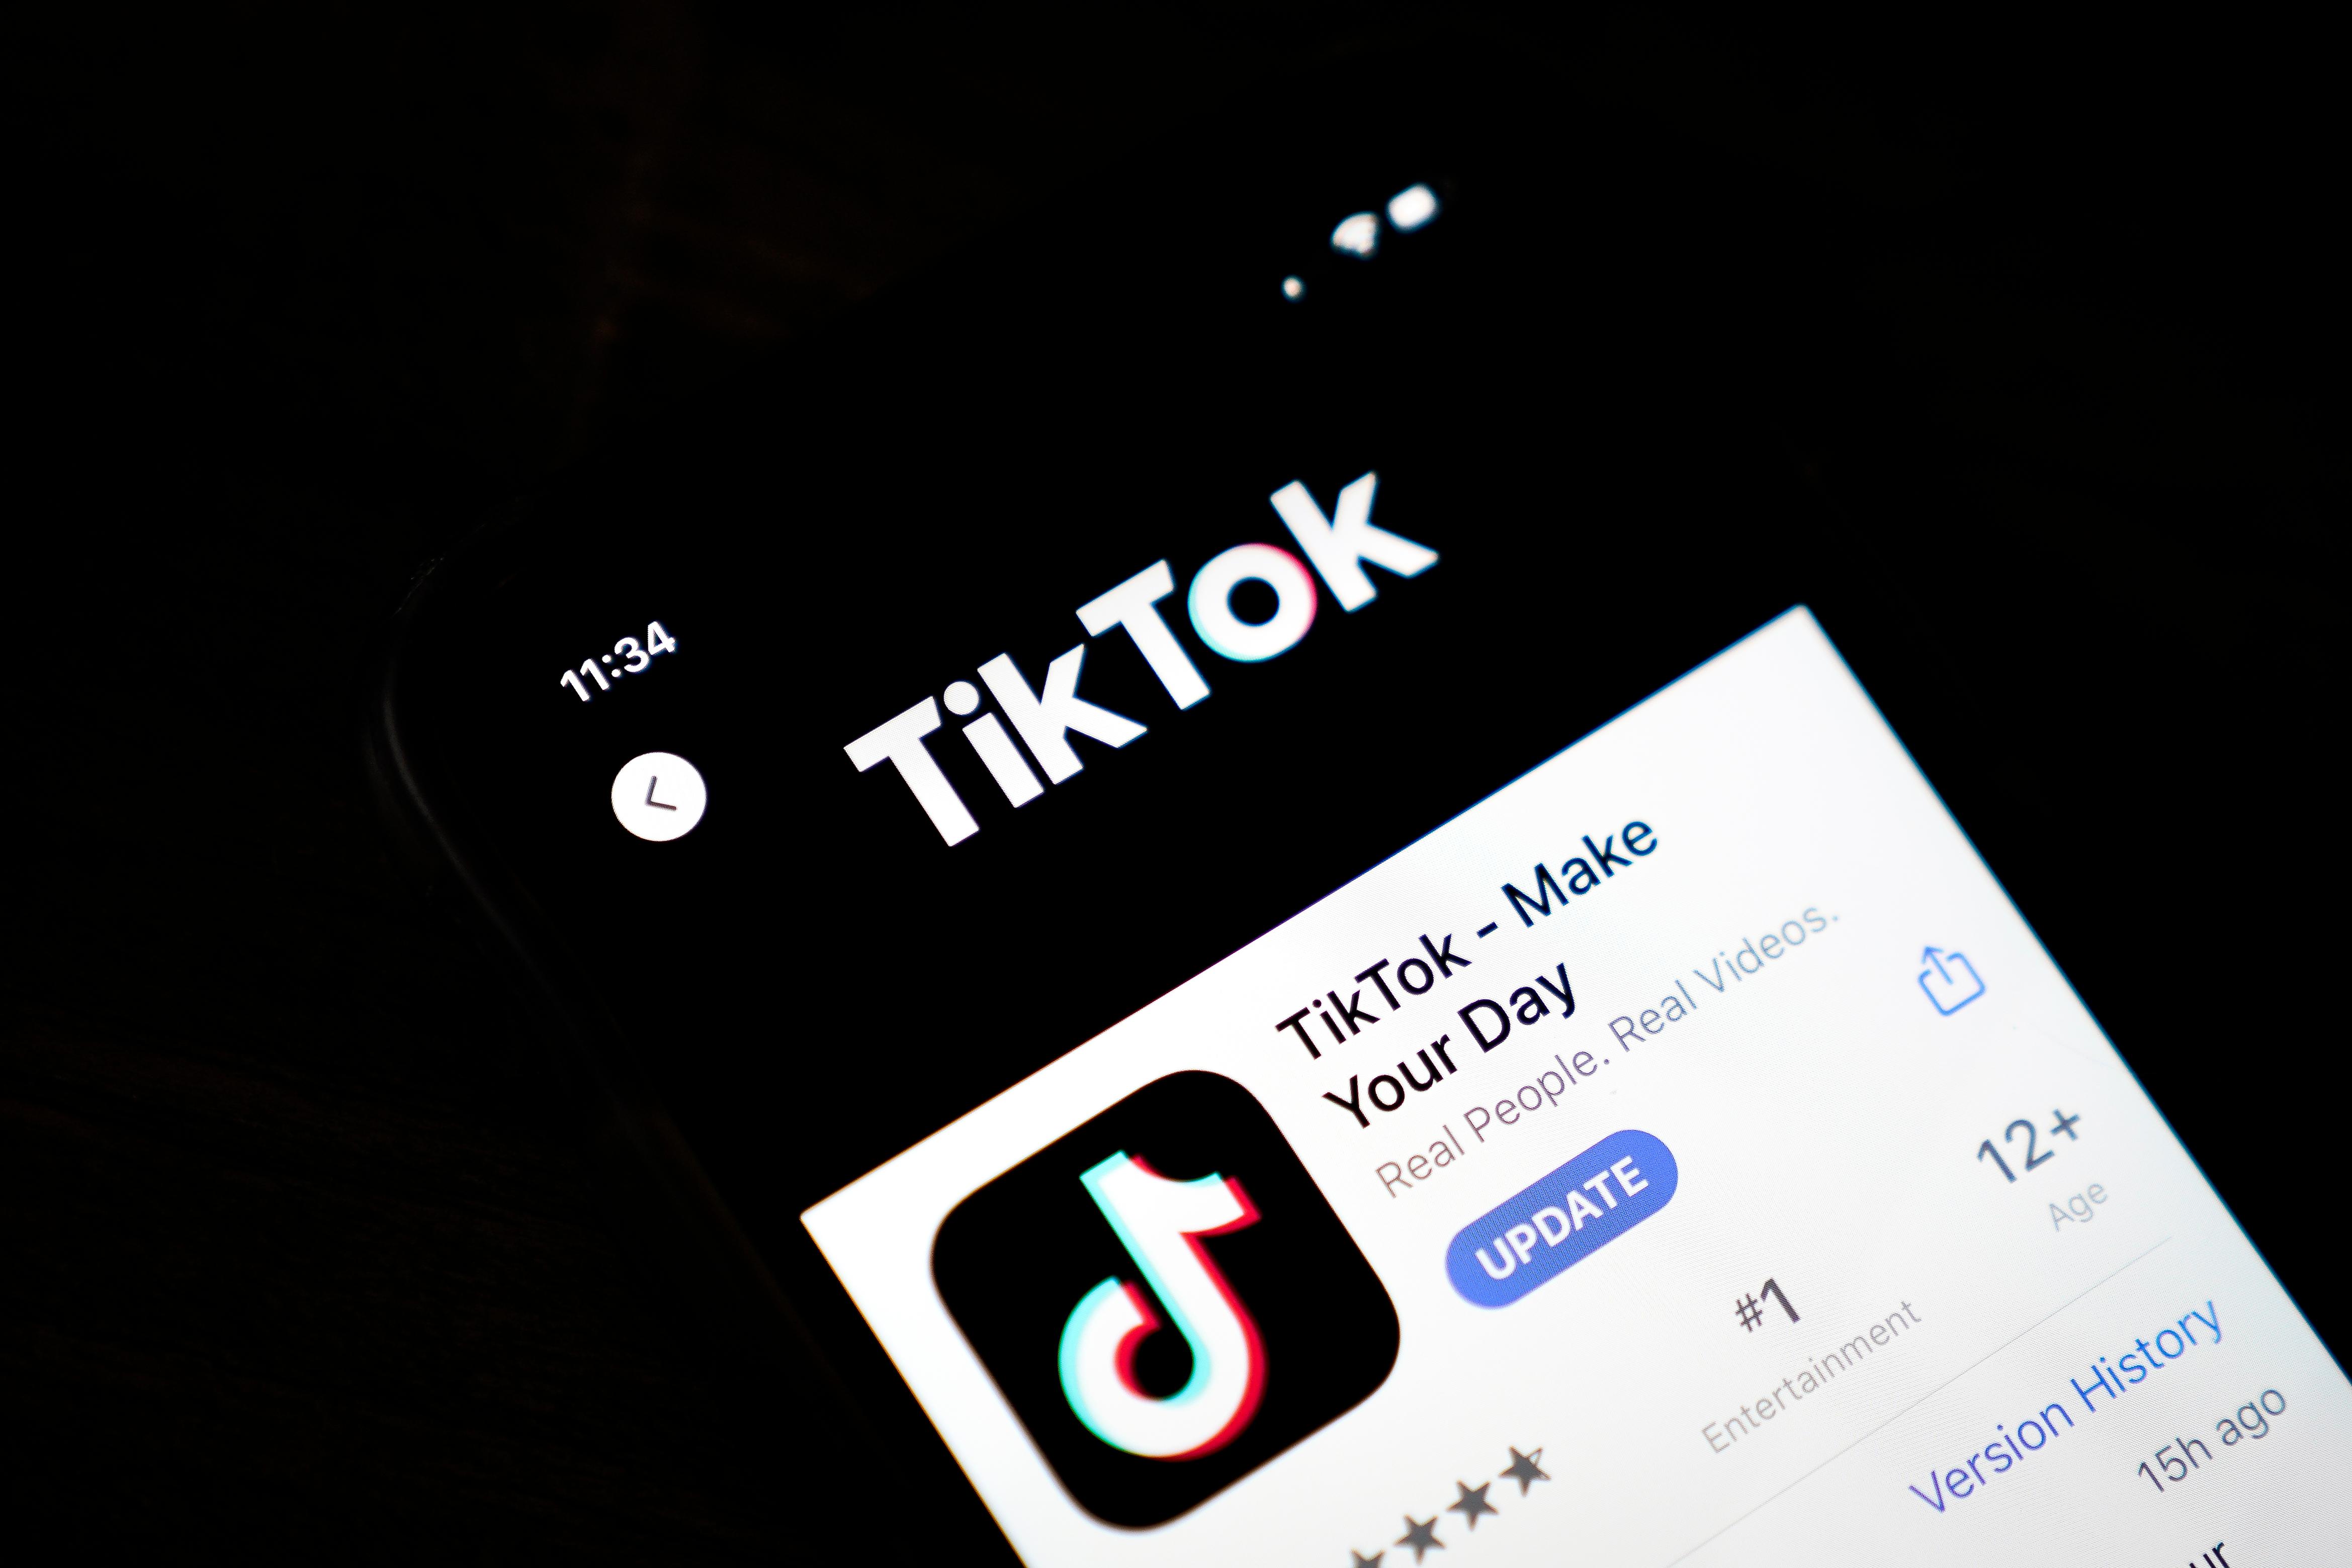 The latest TikTok trend involves a woman saying "Holy spirit activate"